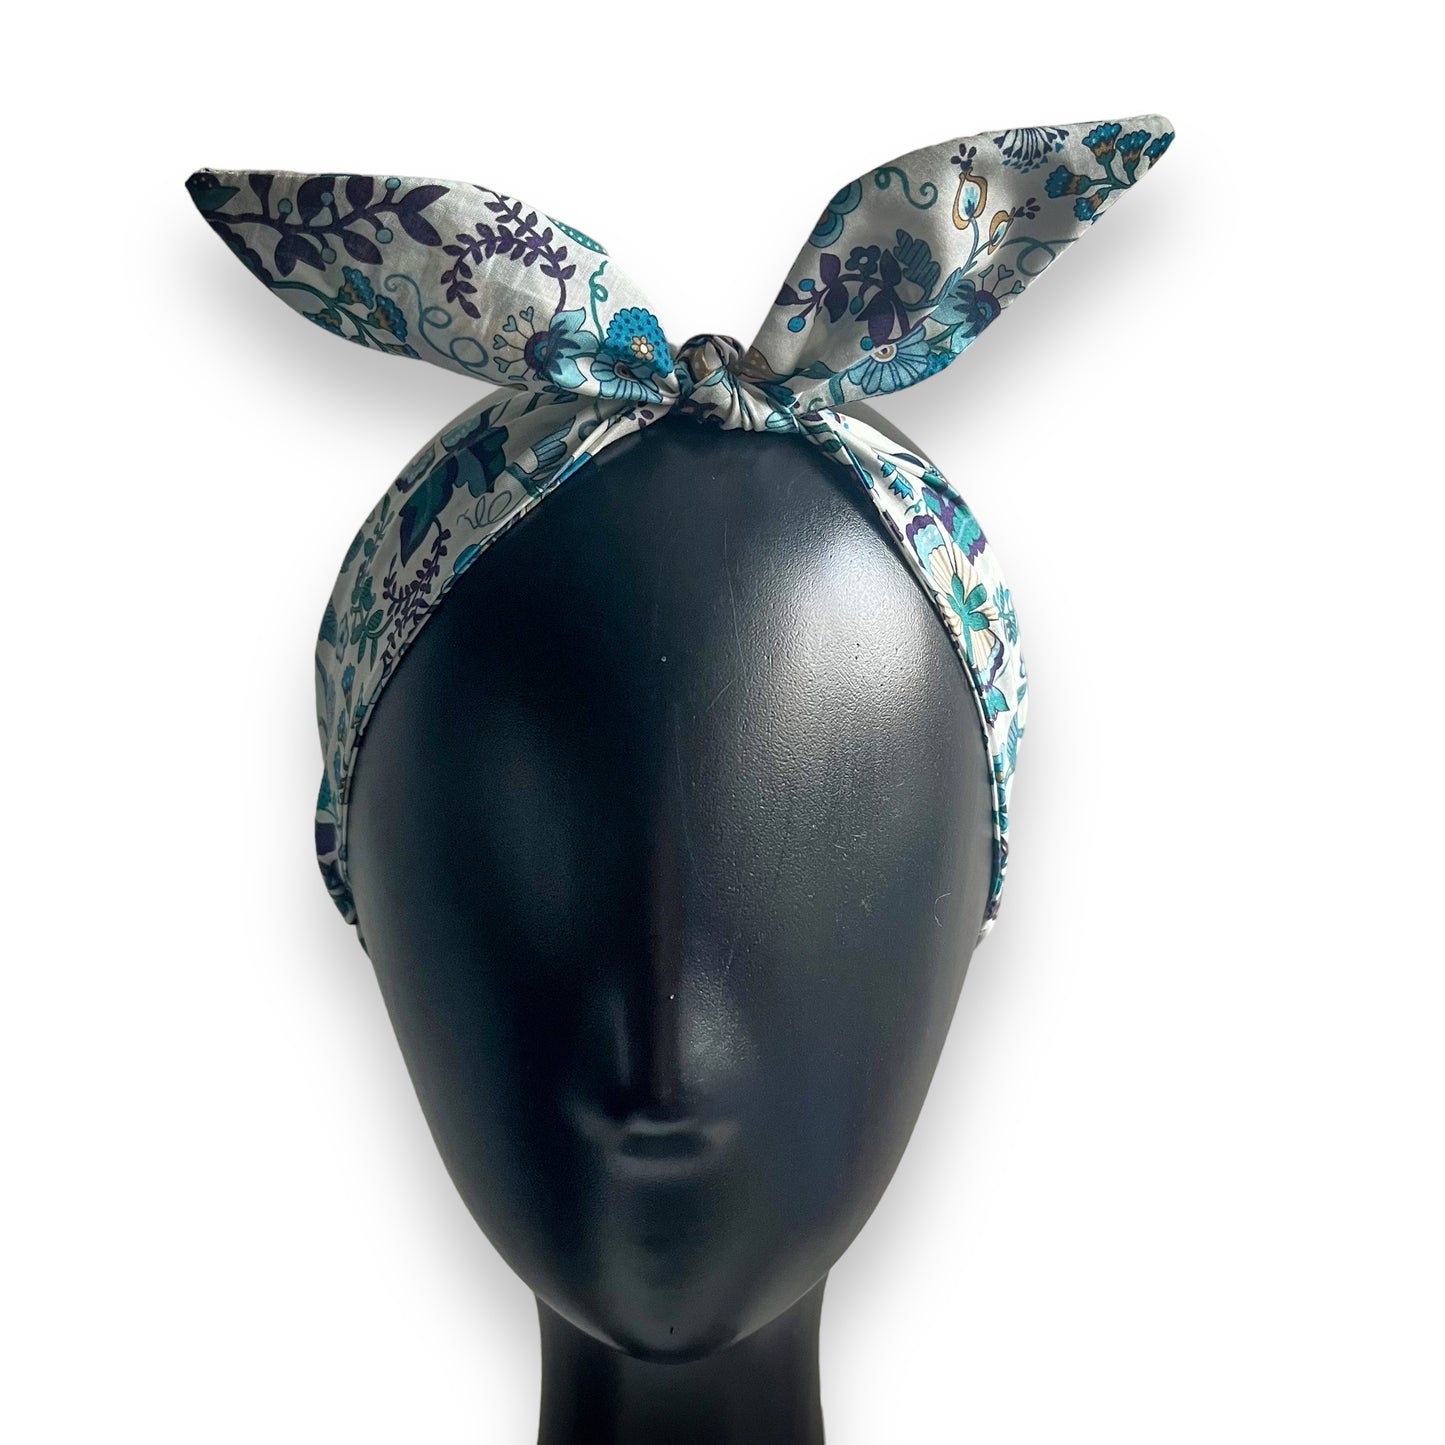 Soft Knotted Hairband - Liberty Mabelle